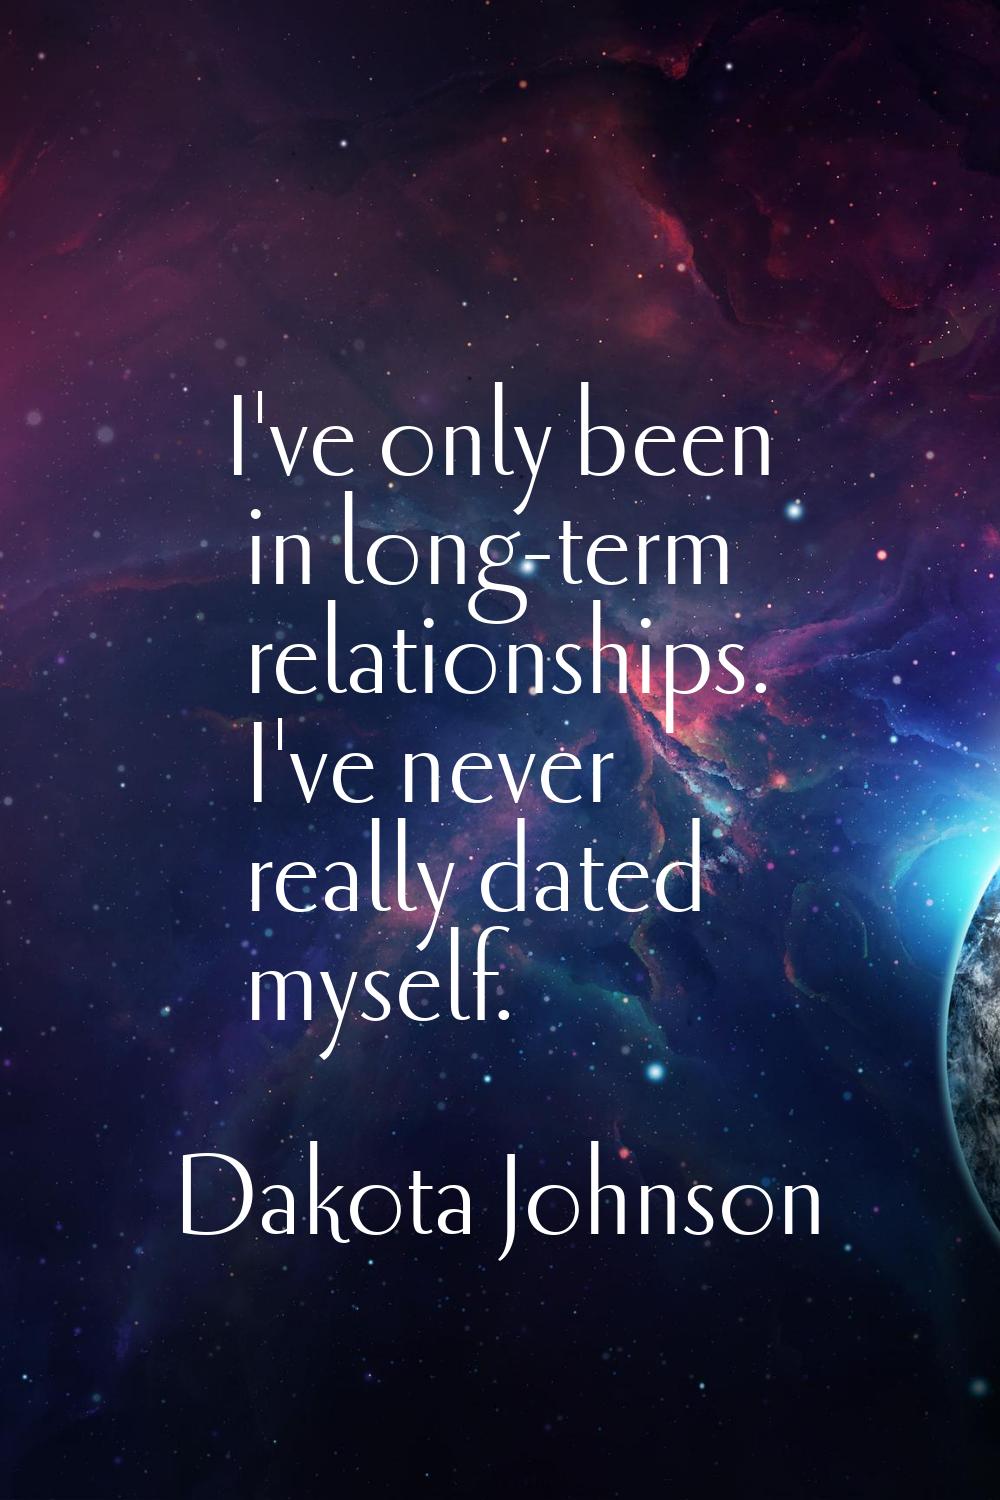 I've only been in long-term relationships. I've never really dated myself.